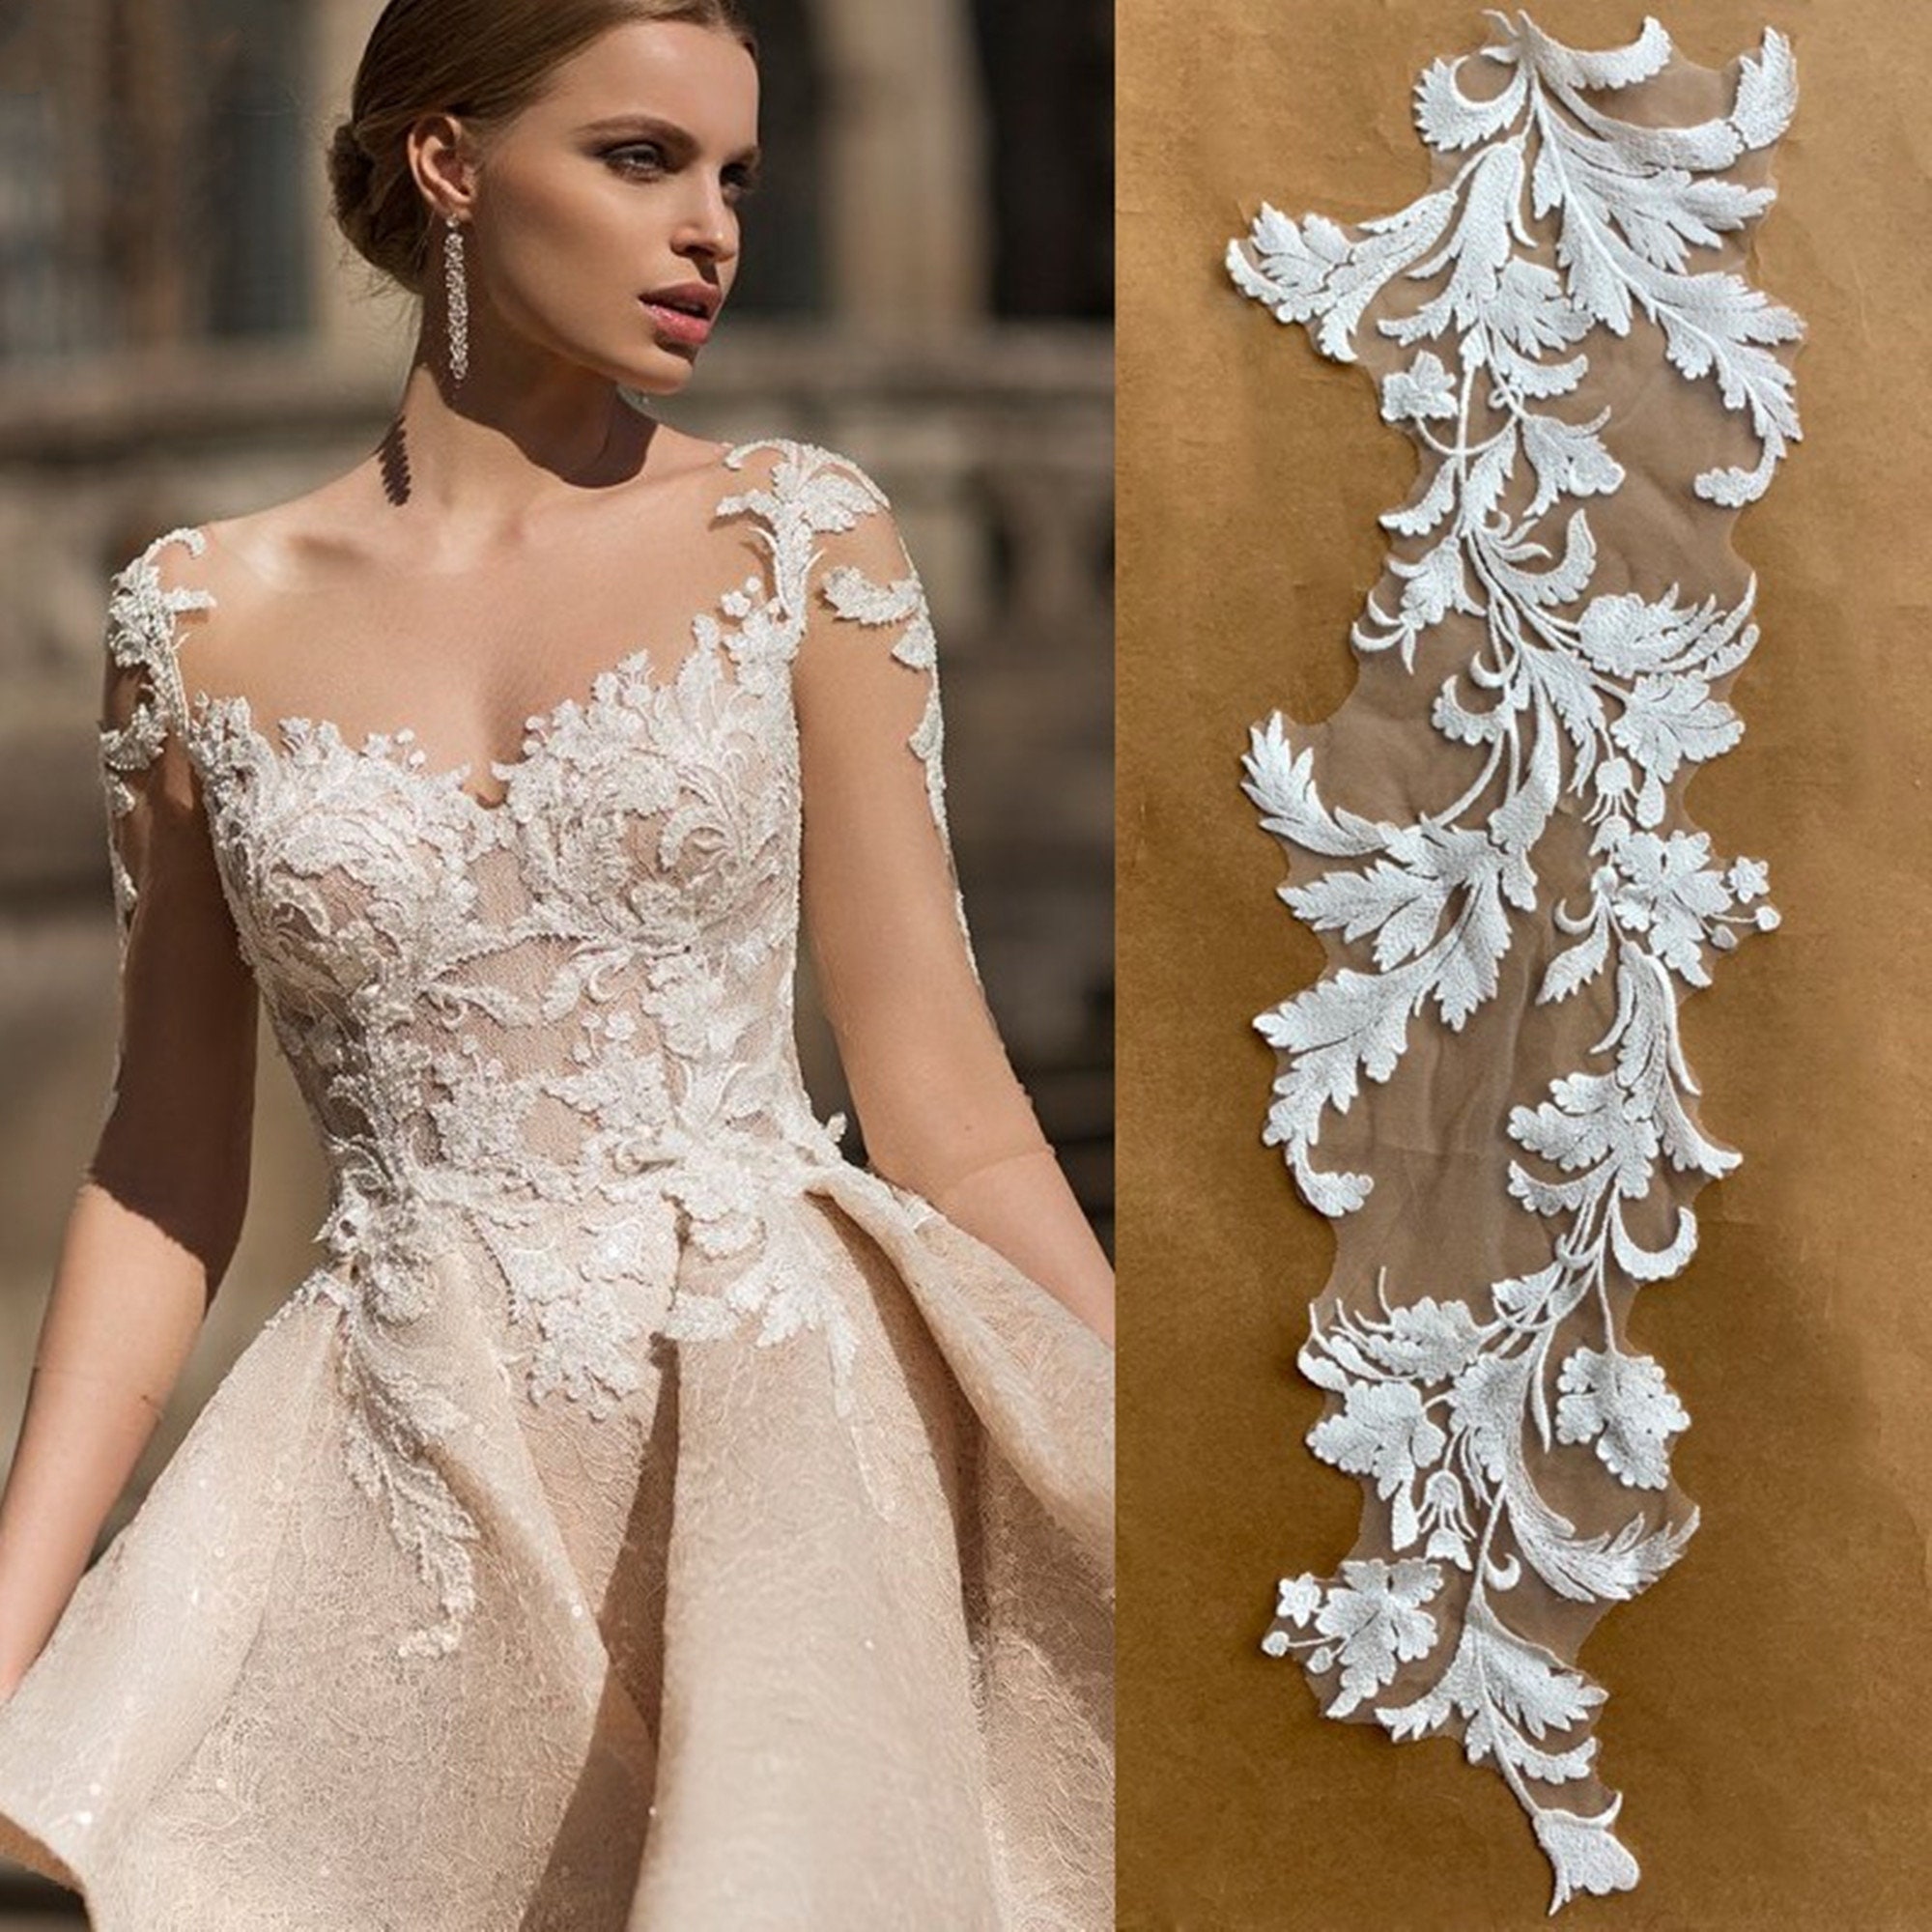 Off White Leaf Embroidery Lace Applique for Bridal Wedding Dress, Bodice  Applique, Evening Gown, Couture Design, DIY Wedding 